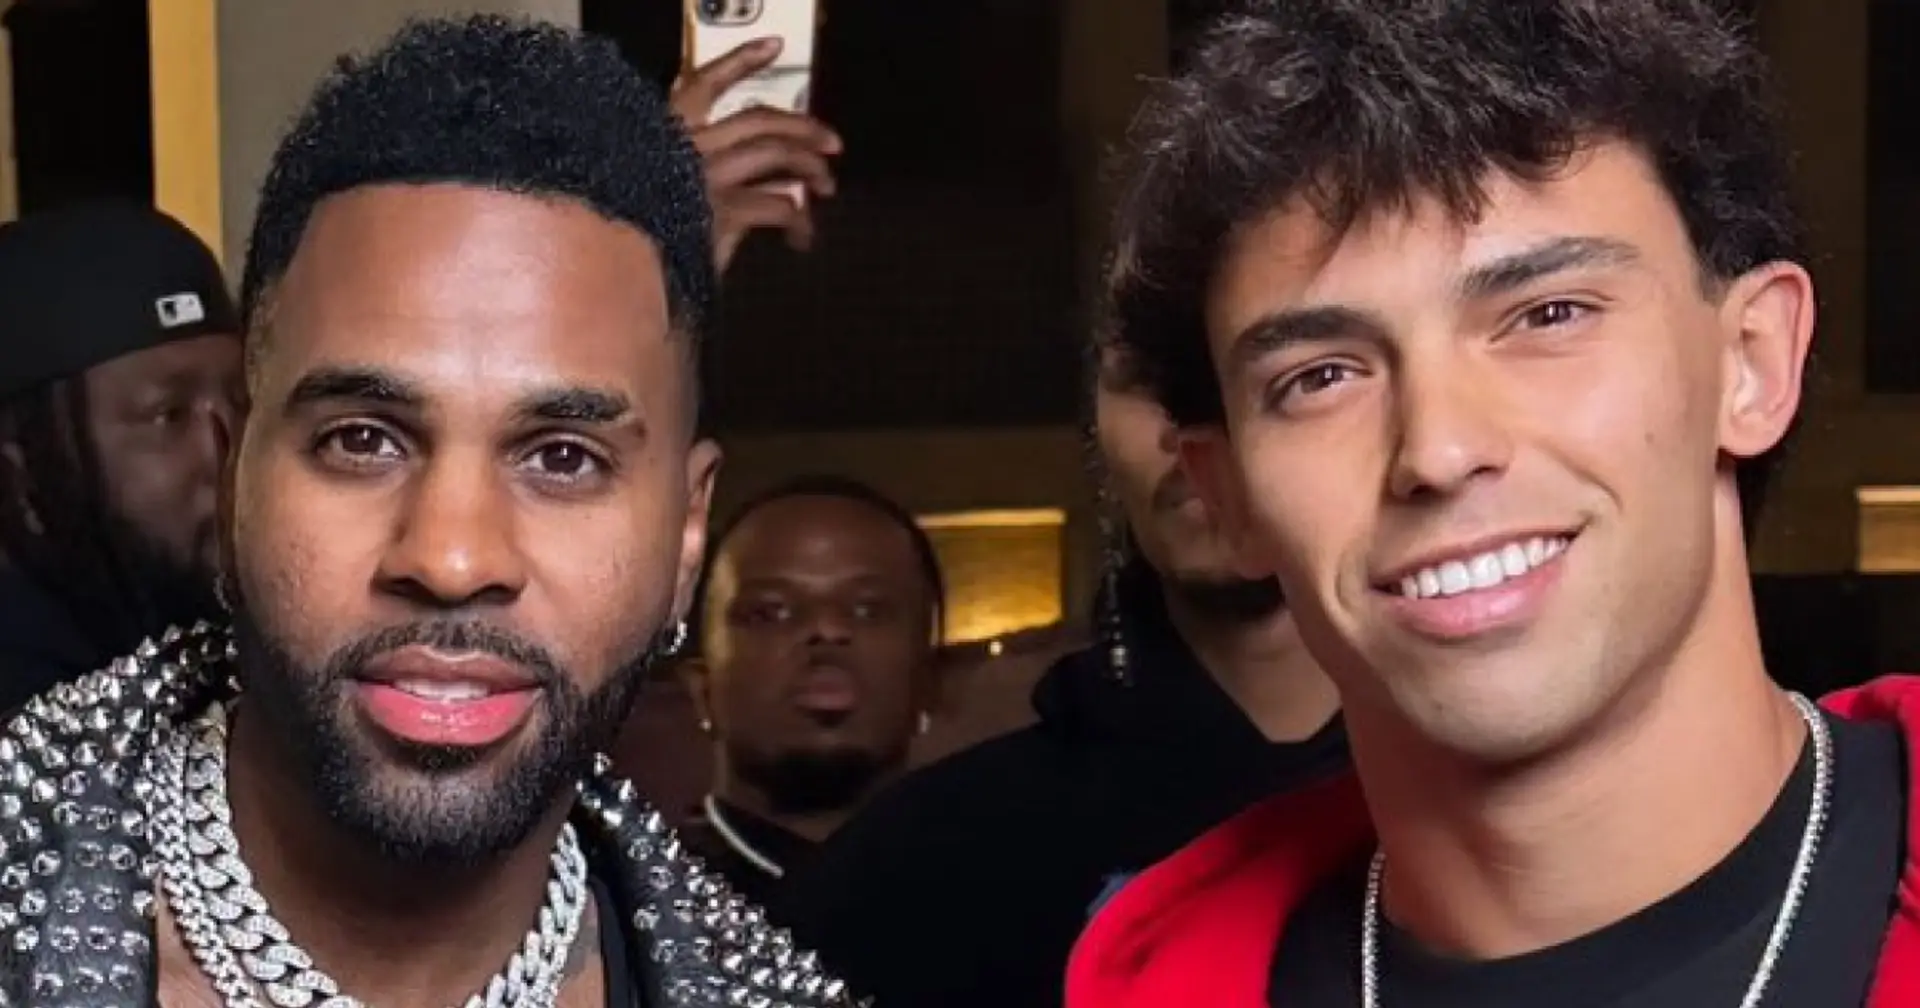 What is music icon Jason Derulo doing in Barcelona? Spotted with Joao Felix and Gavi